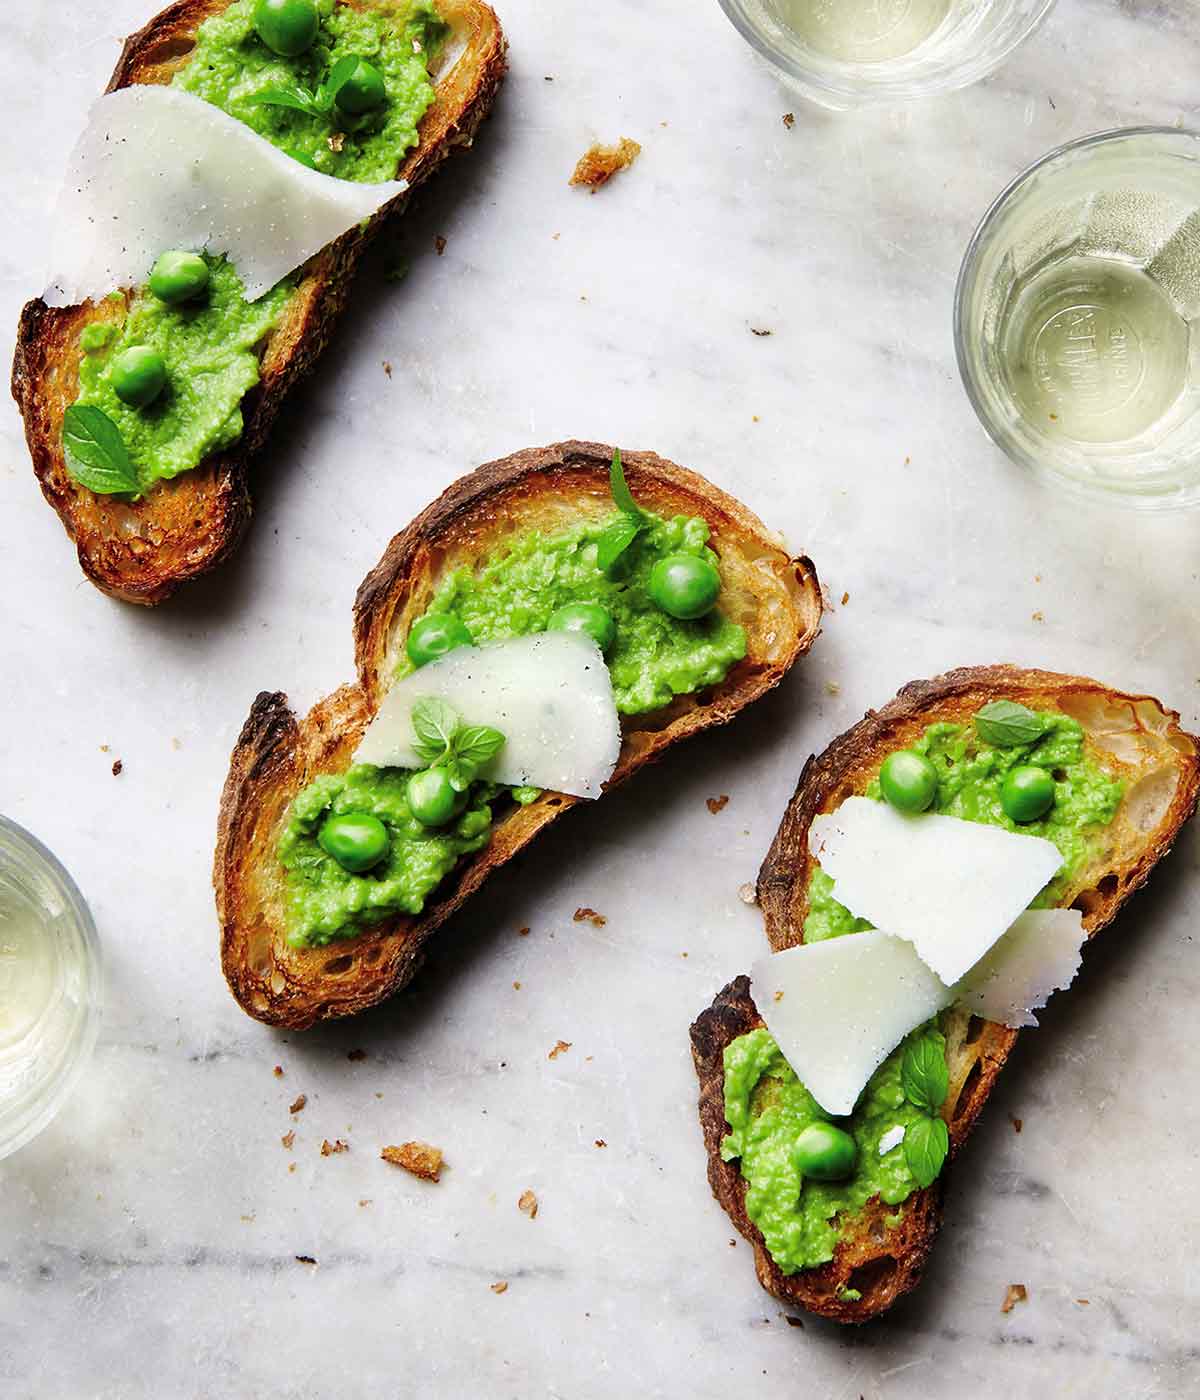 Three sweet pea crostini topped with pecorino shavings on a marble surface with glasses of white wine nearby.